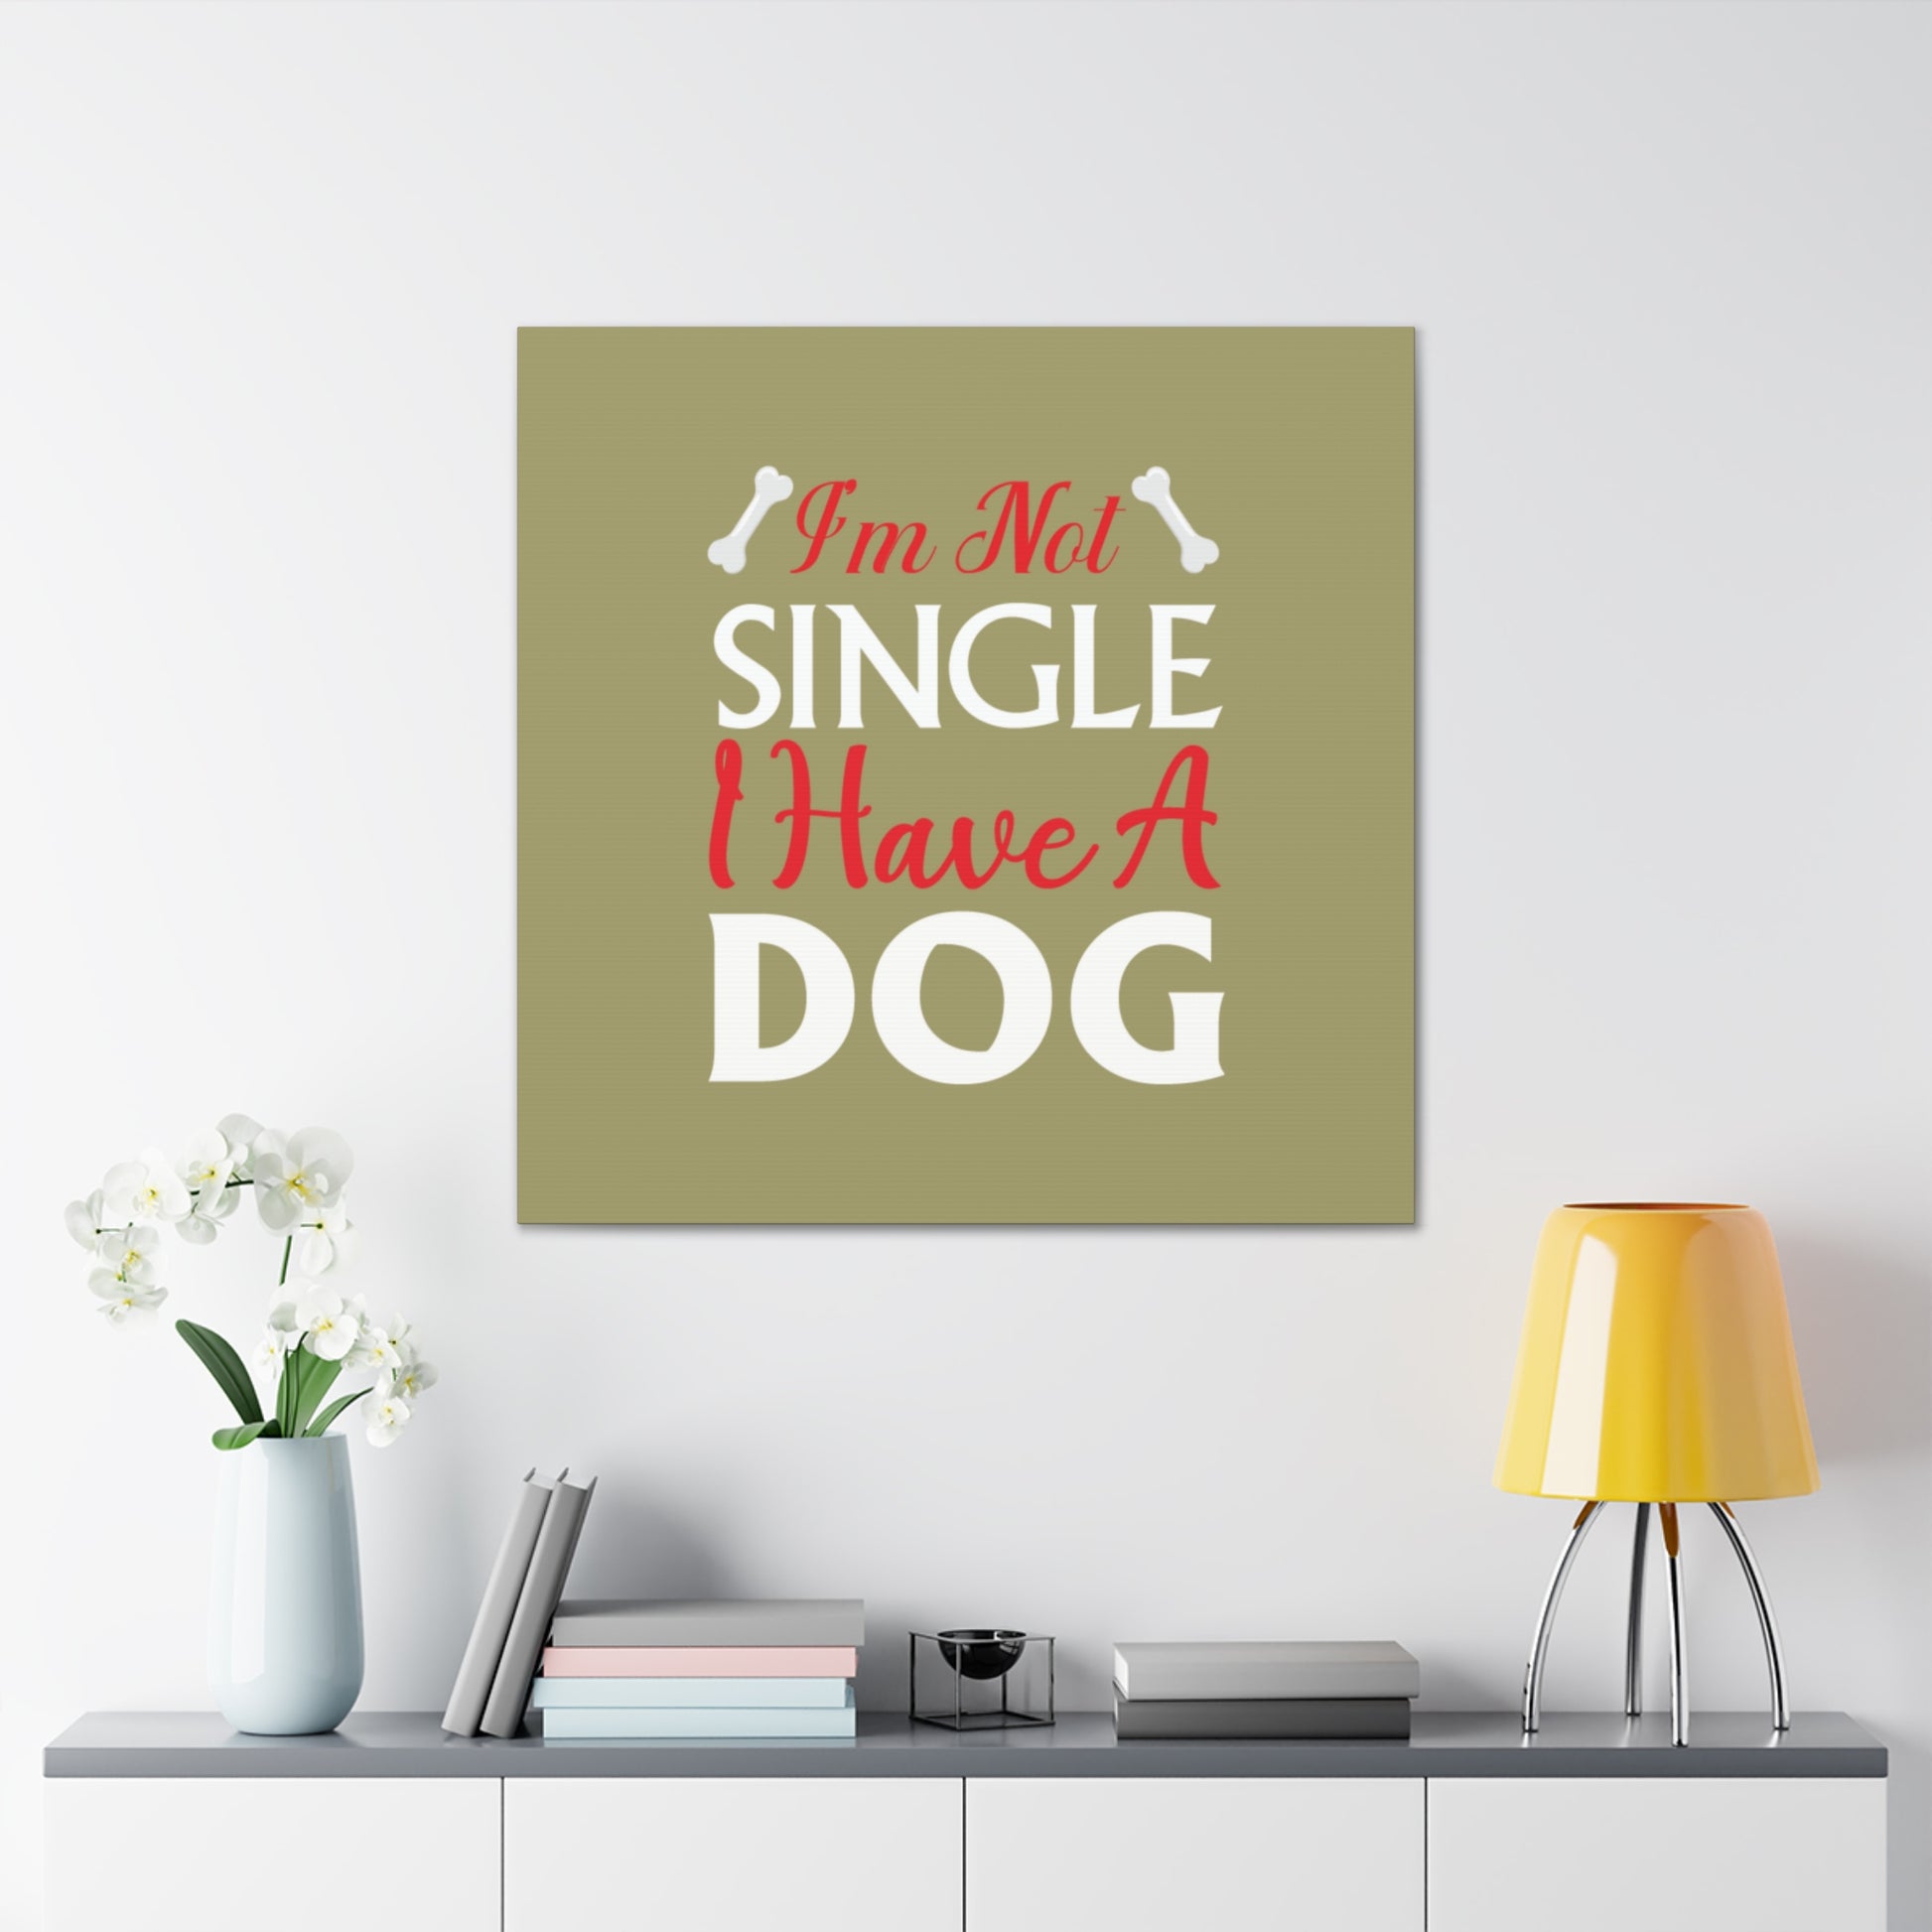 "I'm Not Single, I Have A Dog" Wall Art - Weave Got Gifts - Unique Gifts You Won’t Find Anywhere Else!